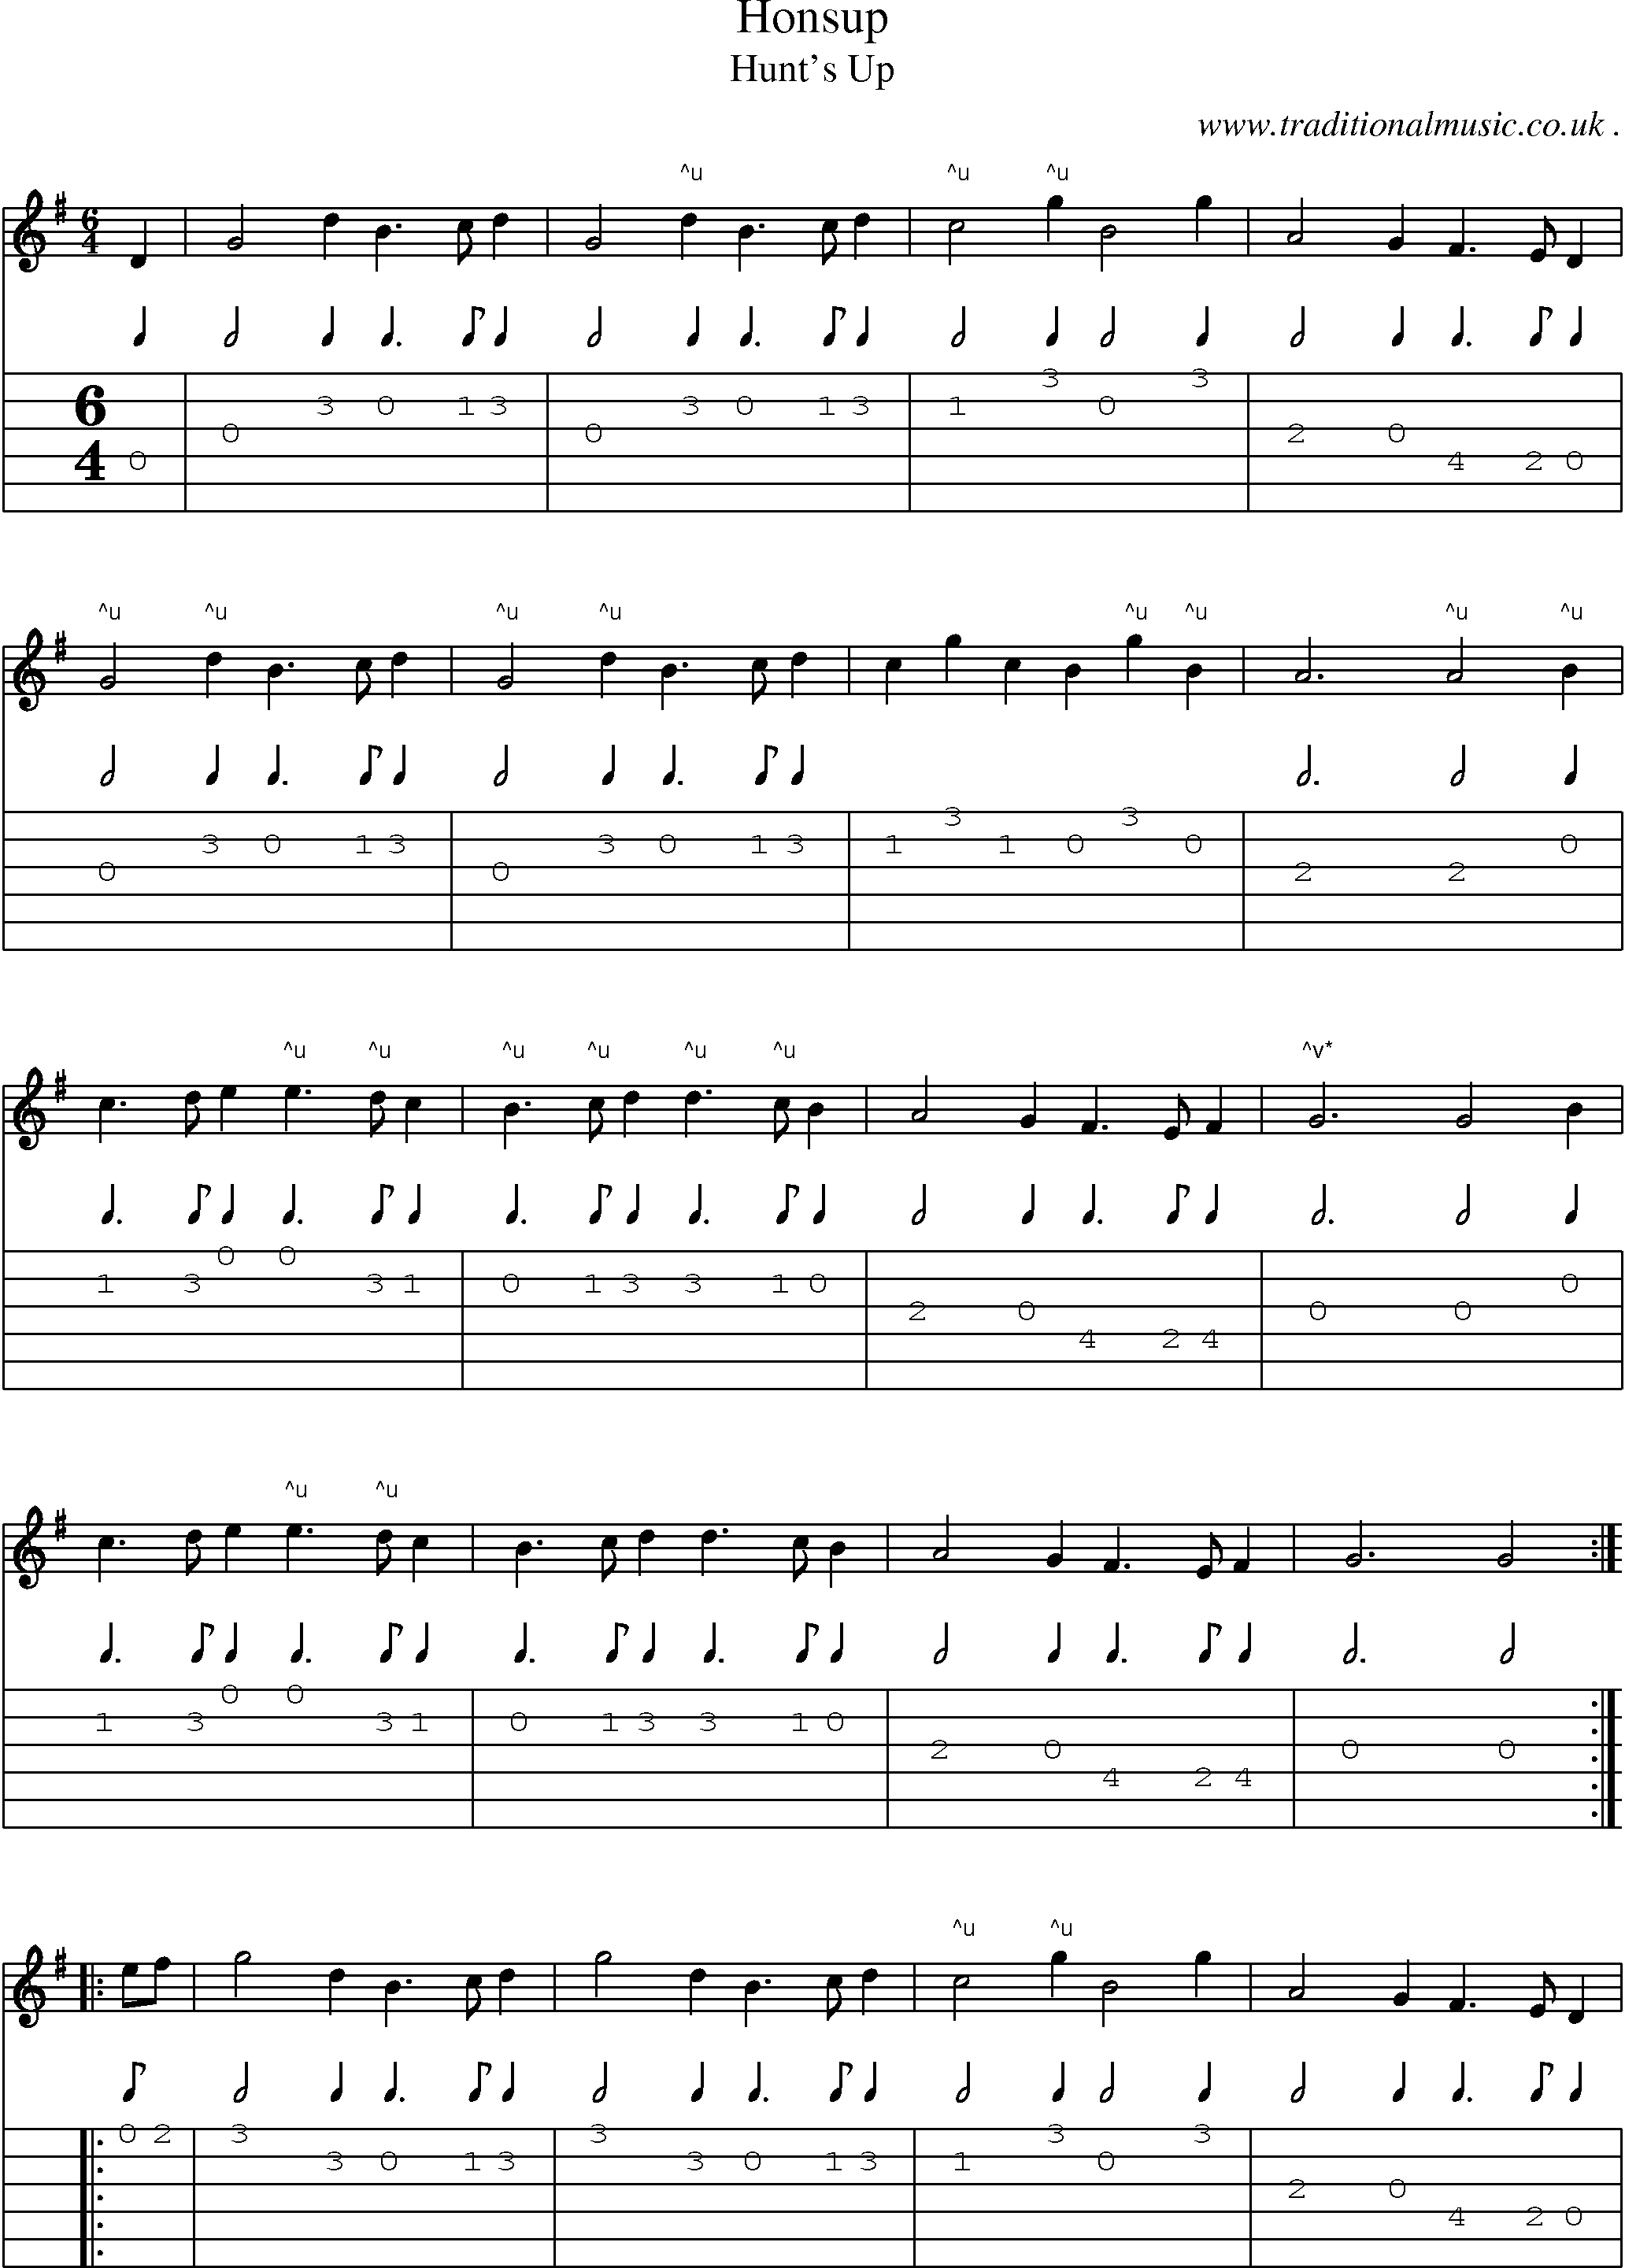 Sheet-Music and Guitar Tabs for Honsup